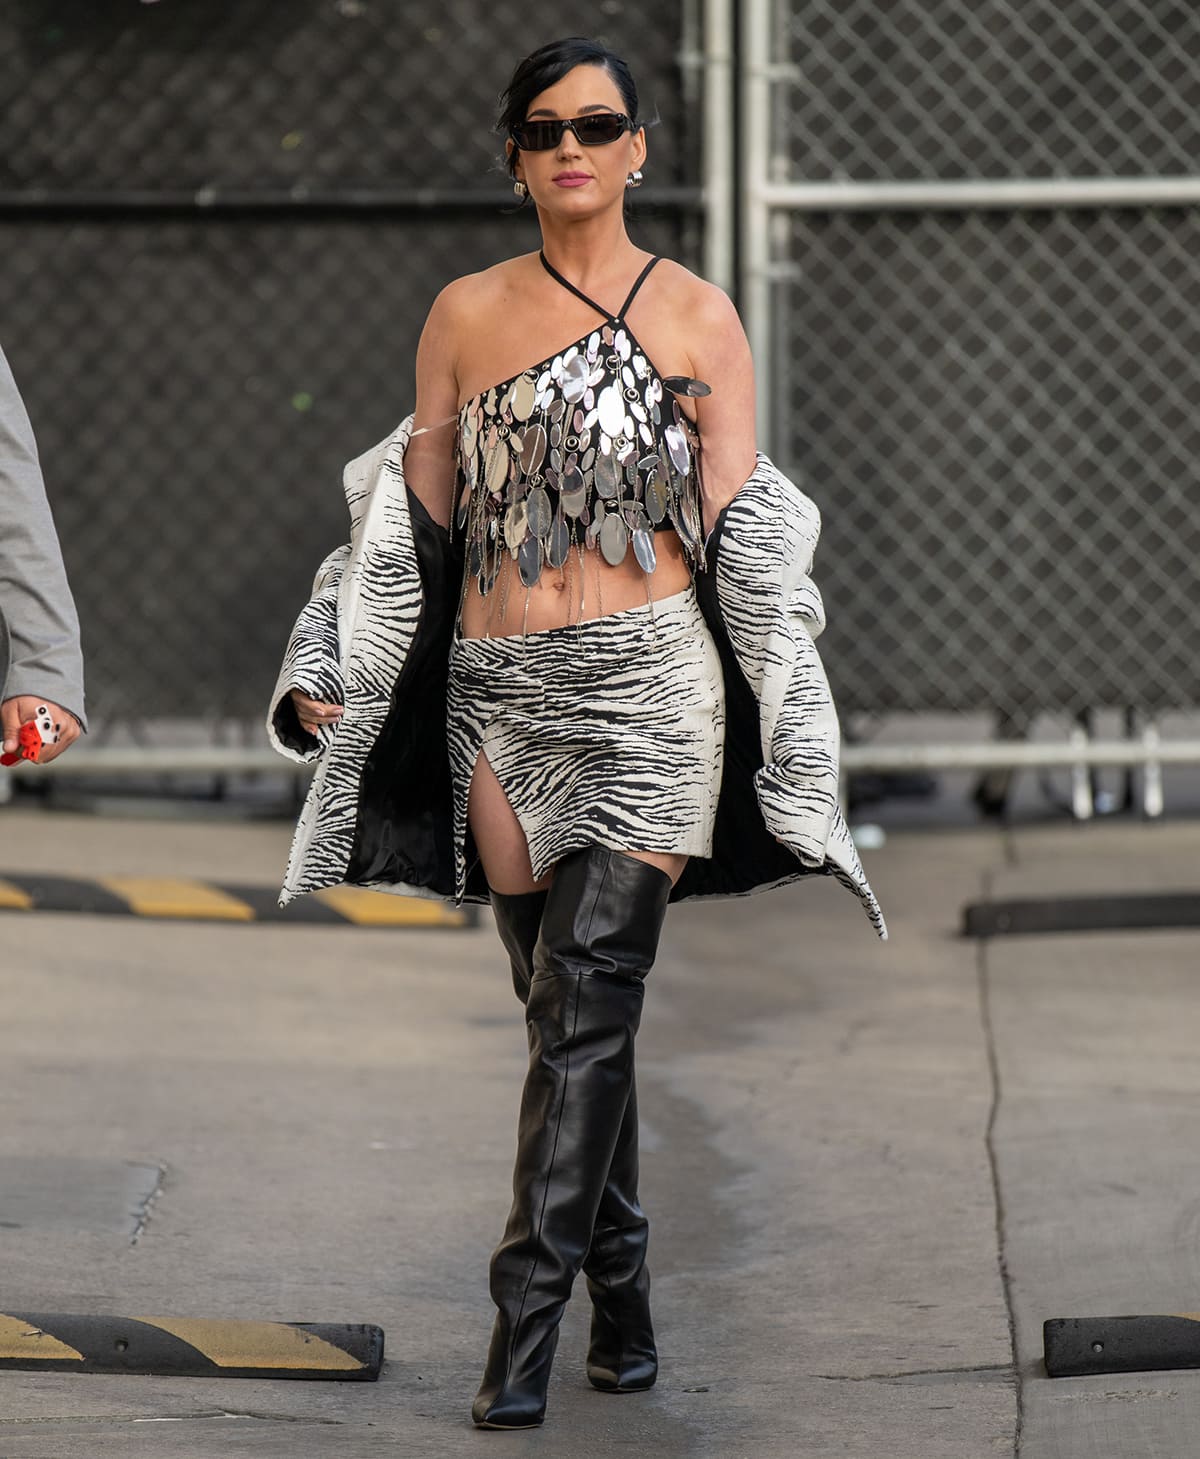 Katy Perry Promotes American Idol Season 21 In Dazzling Disco Ball Crop Top And Zebra Skirt Suit